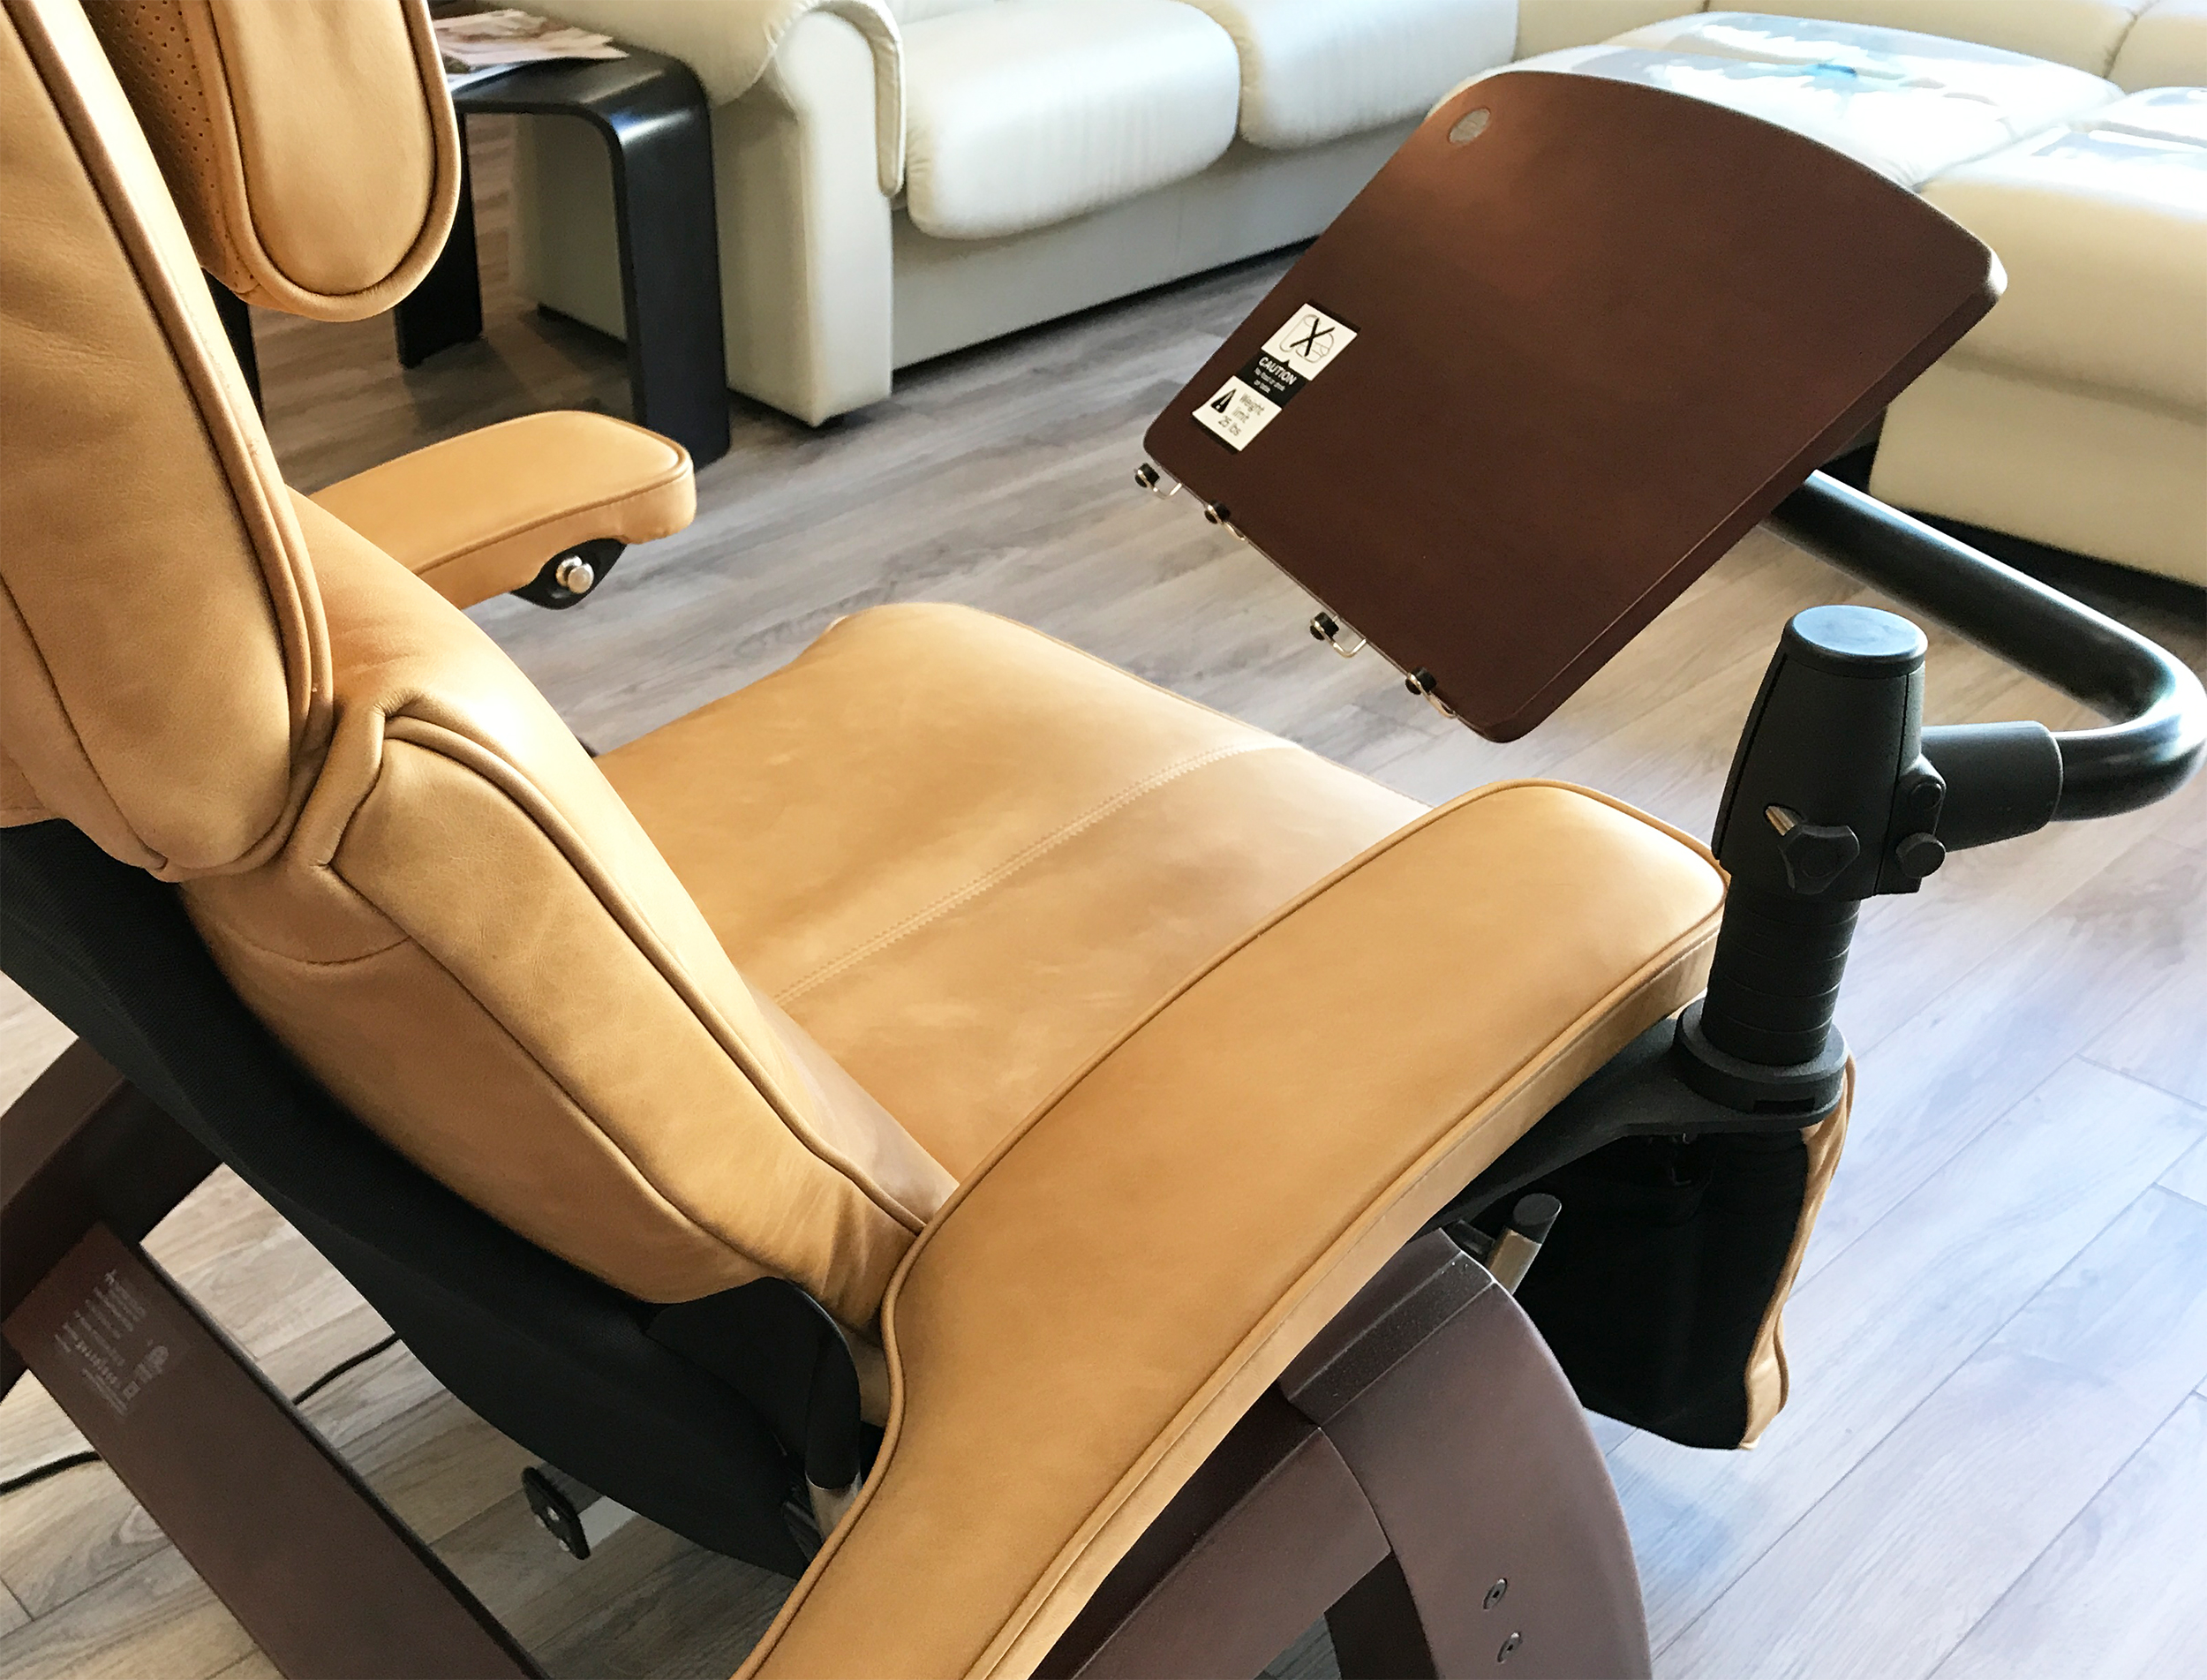 https://vitalityweb.com/backstore/HumanTouch/pics/Human-Touch-PC-610-Omni-Motion-Perfect-Chair-Recliner-Sycamore-Leather-6.jpg